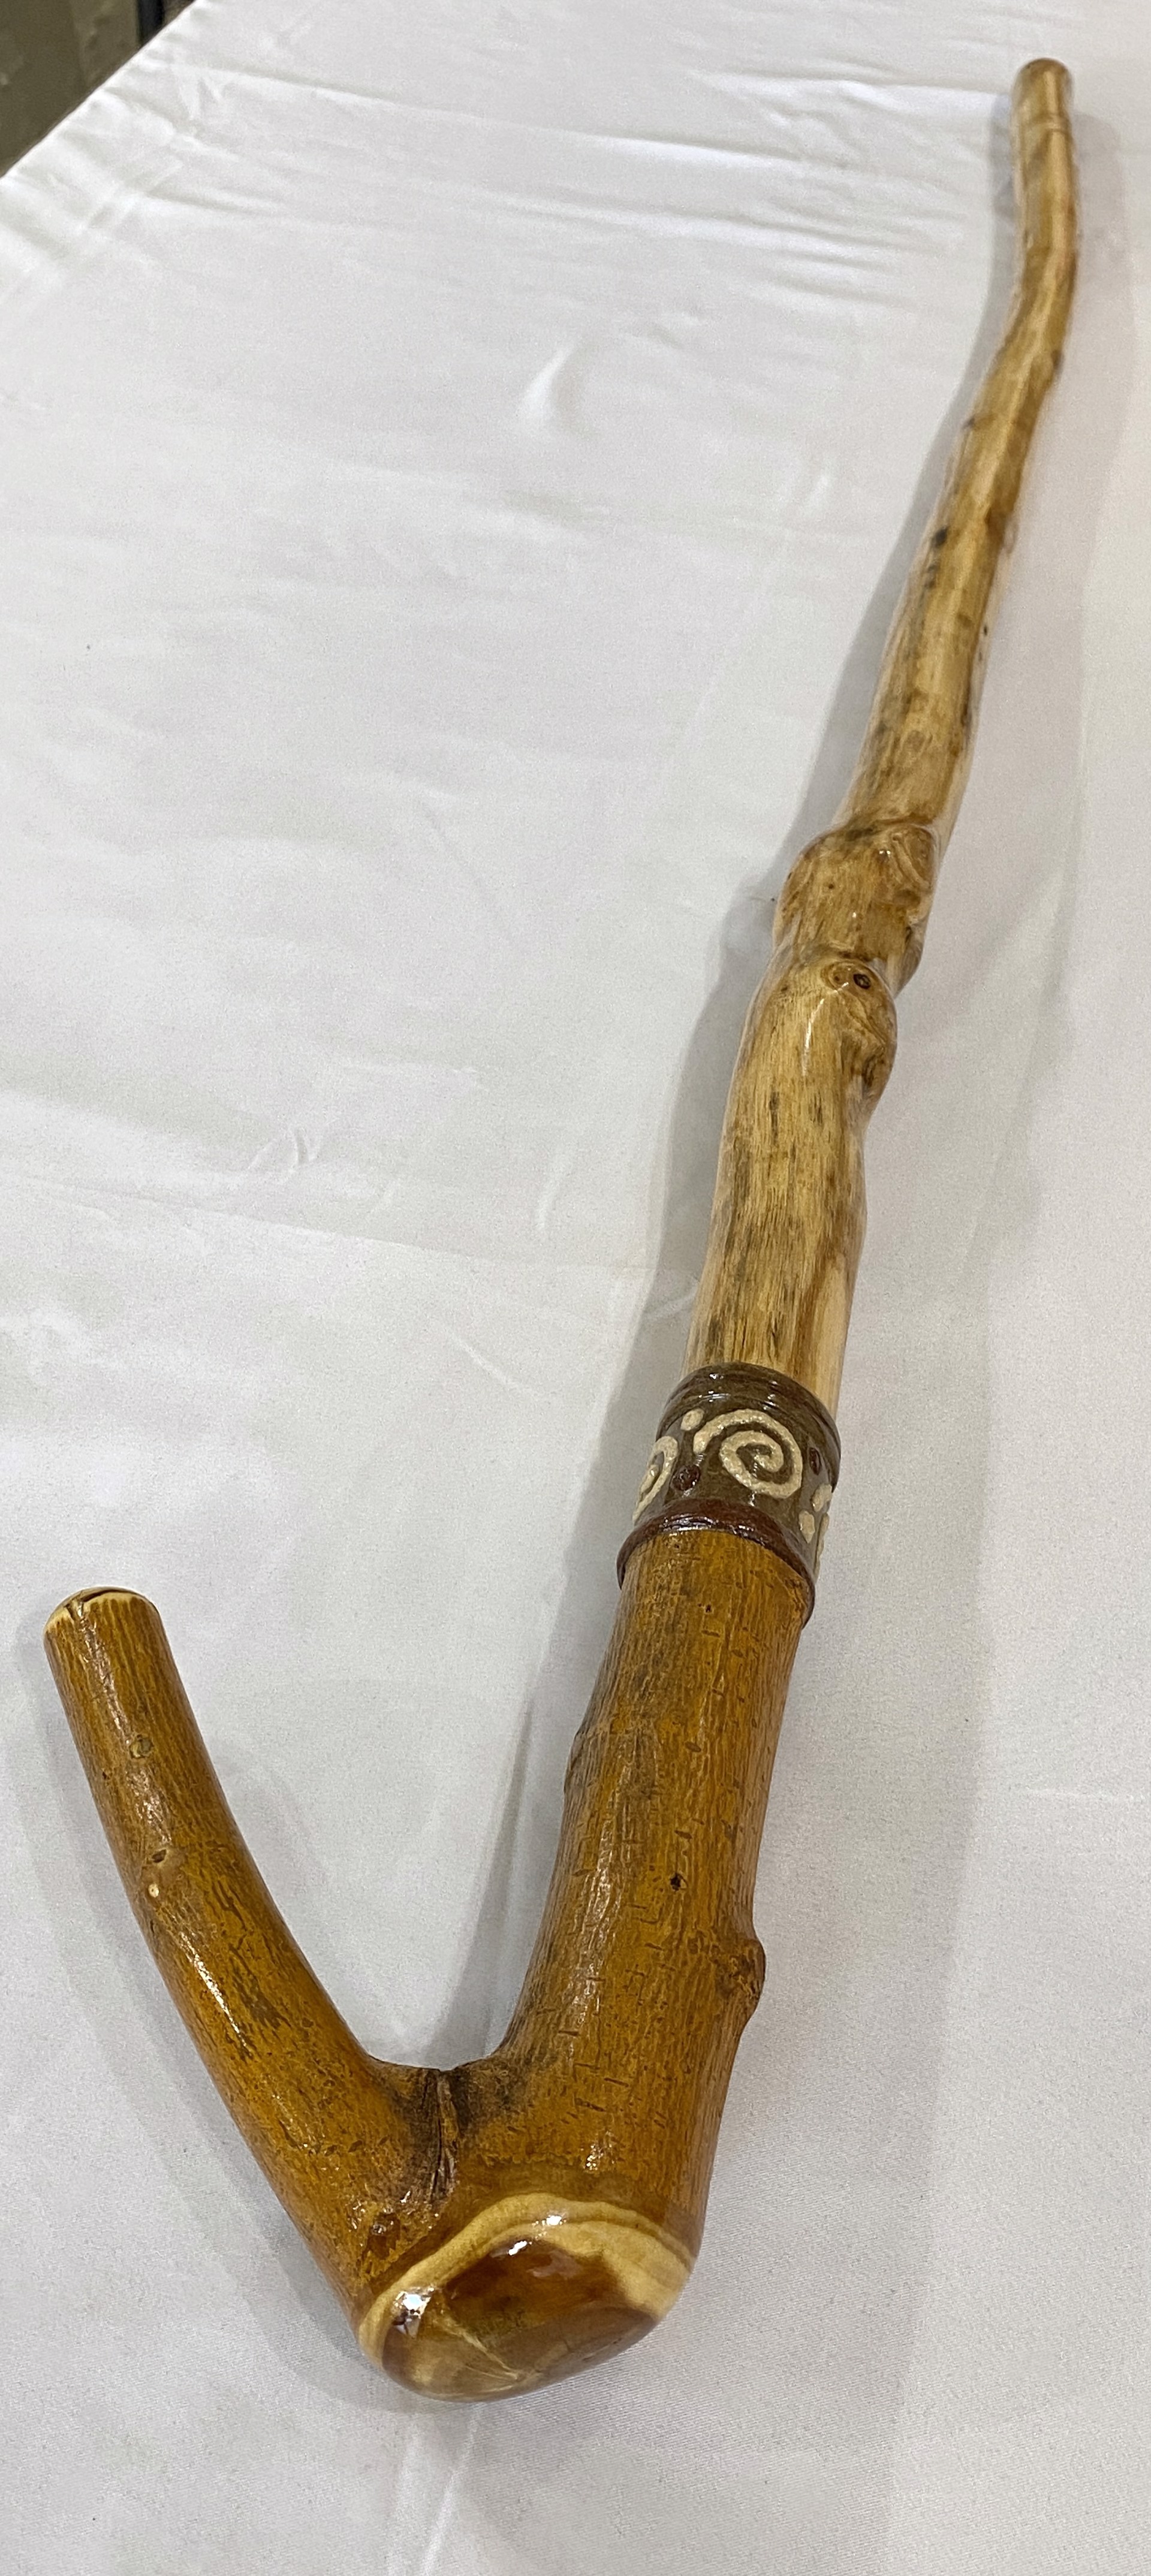 Wooden Walking Stick #12 by Kevin Foote